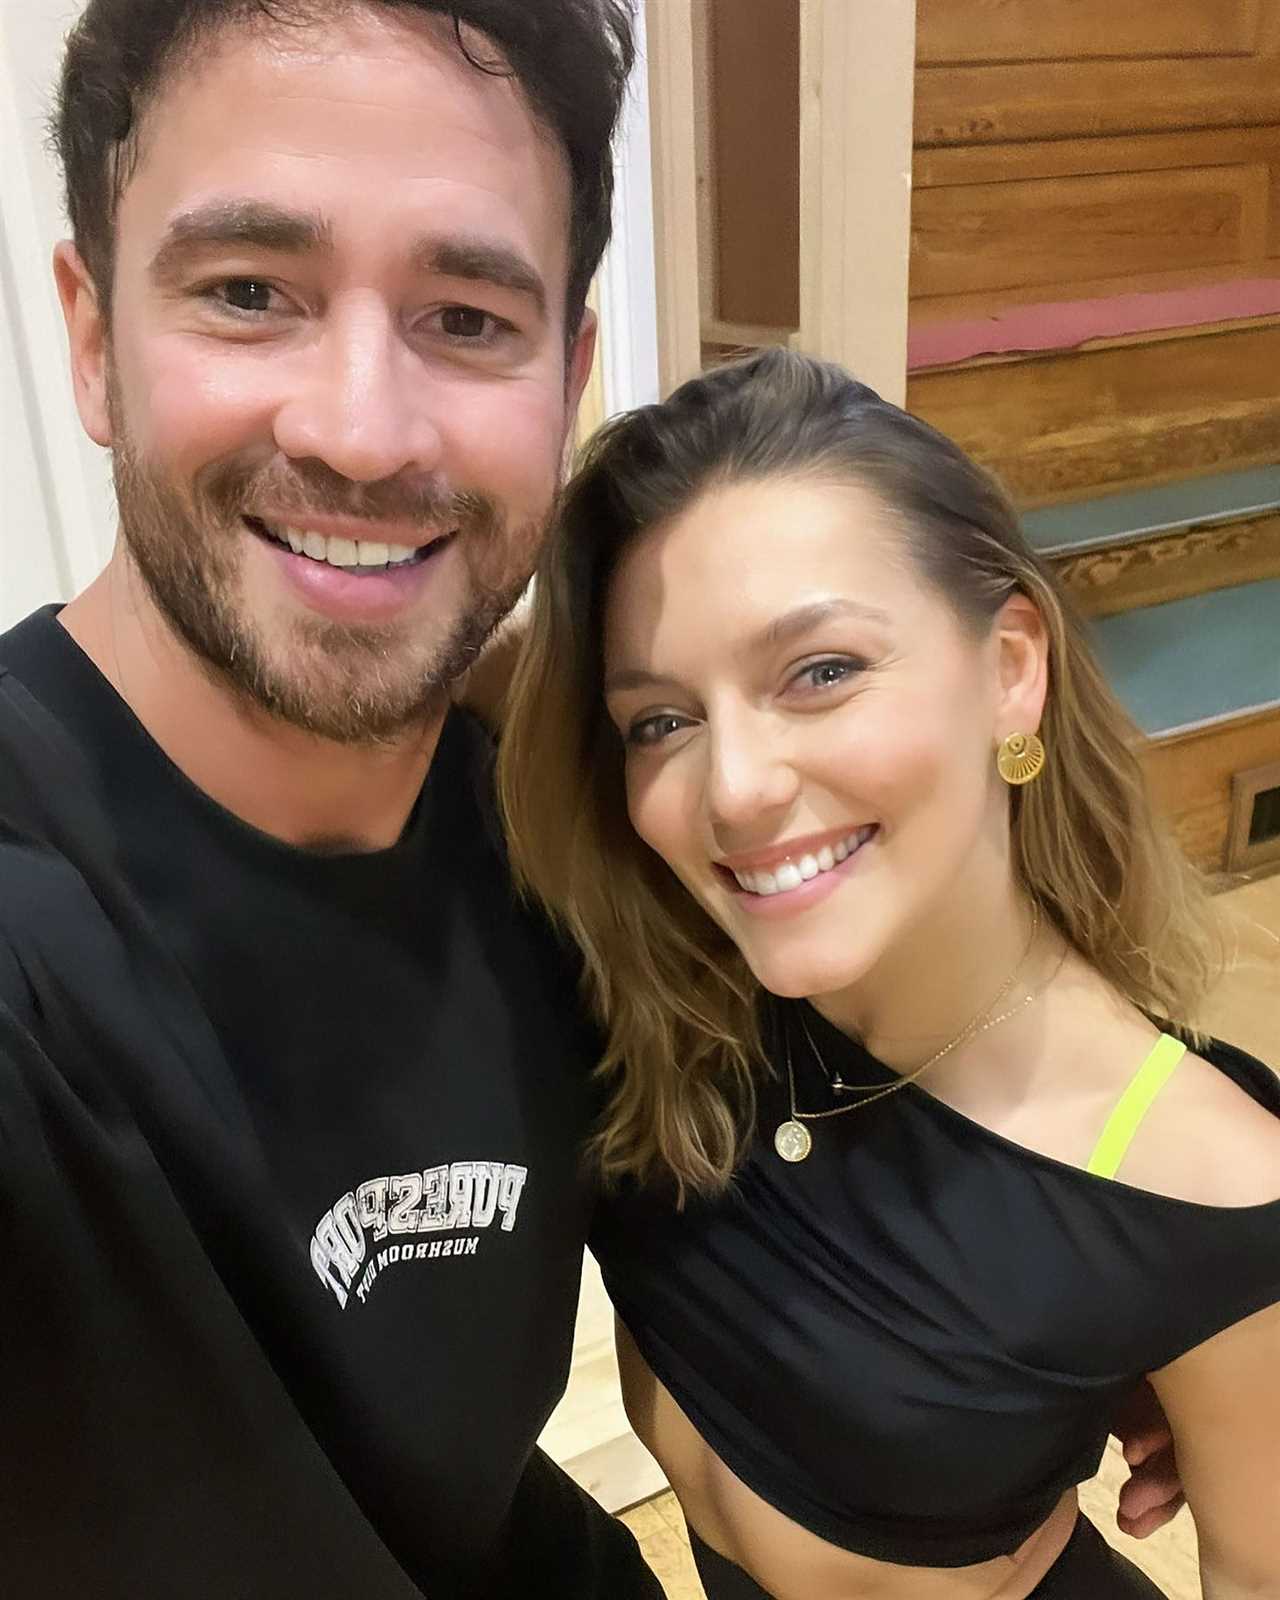 Danny Cipriani's Ex Speaks Out on Split After Being Linked to Strictly Partner